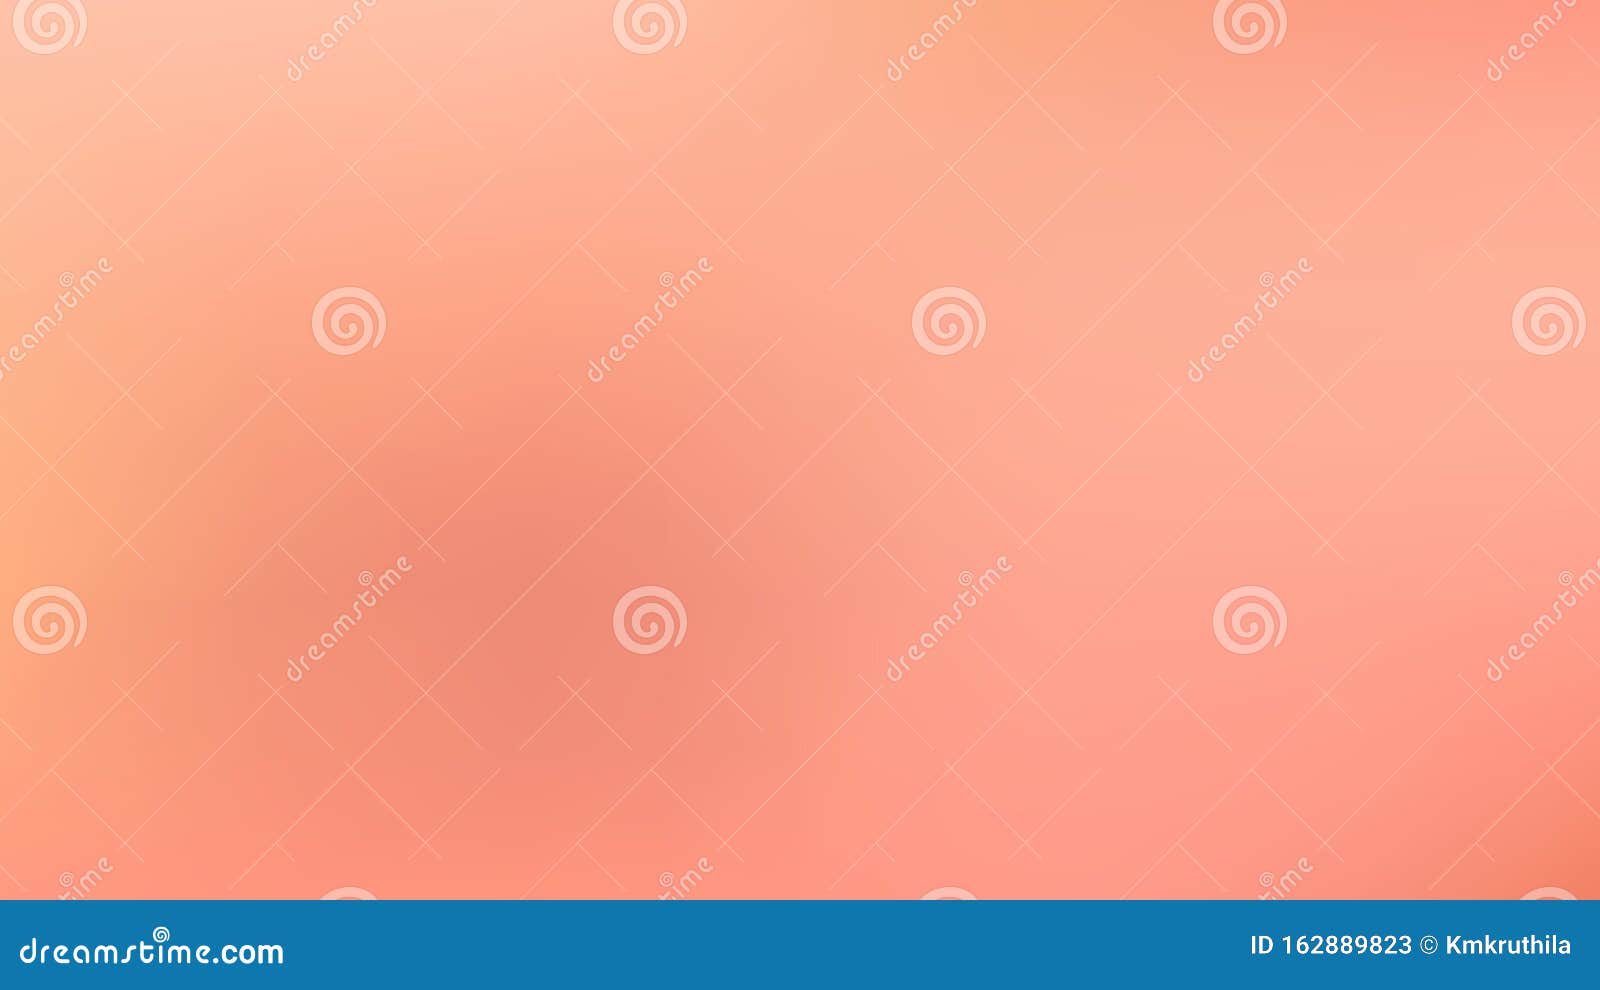 Pastel Red PowerPoint Presentation Background Design Stock Vector -  Illustration of color, template: 162889823